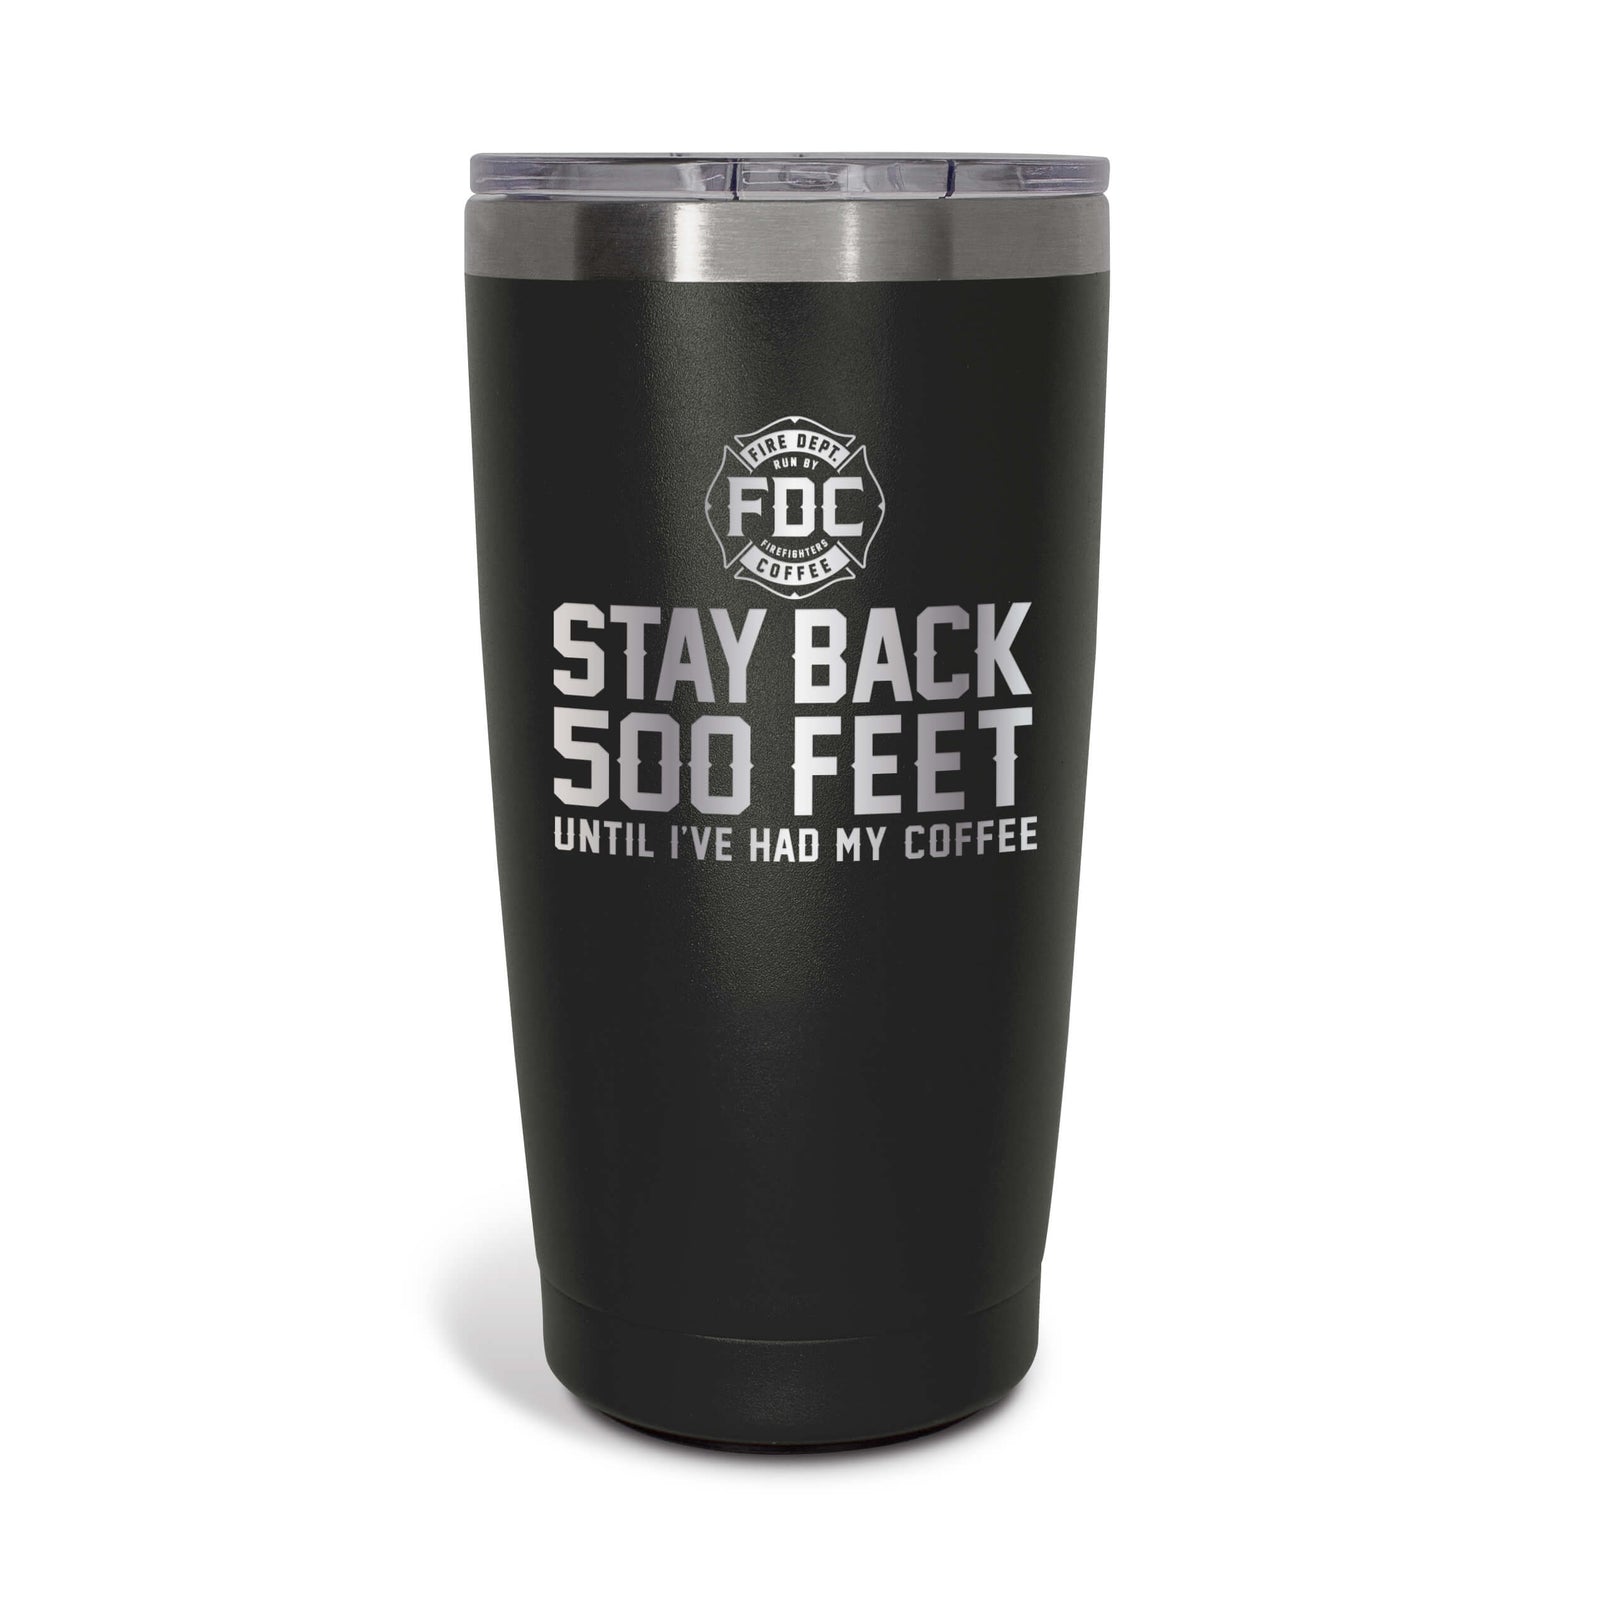 A 20 oz black tumbler that reads STAY BACK 500 FEET UNTIL I'VE HAD MY COFFEE